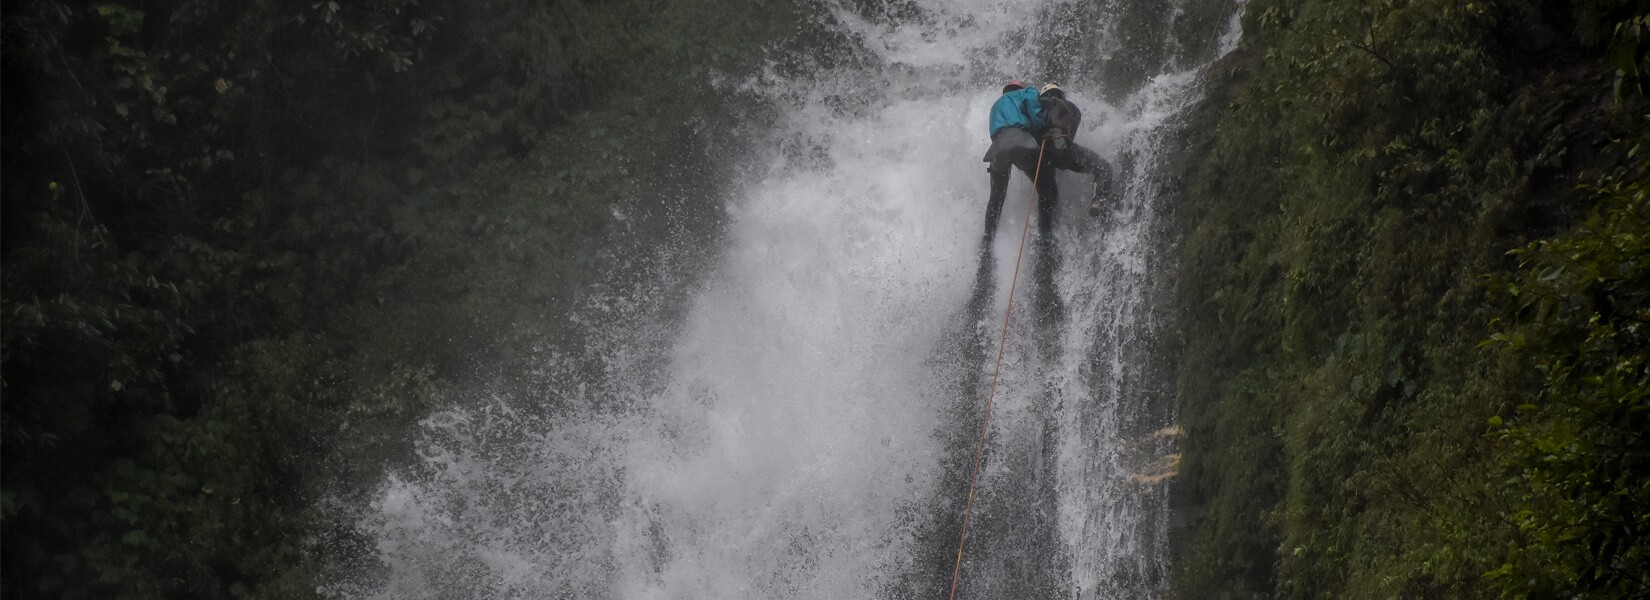 Cannoning Water Thrilling Adventure sport in Nepal